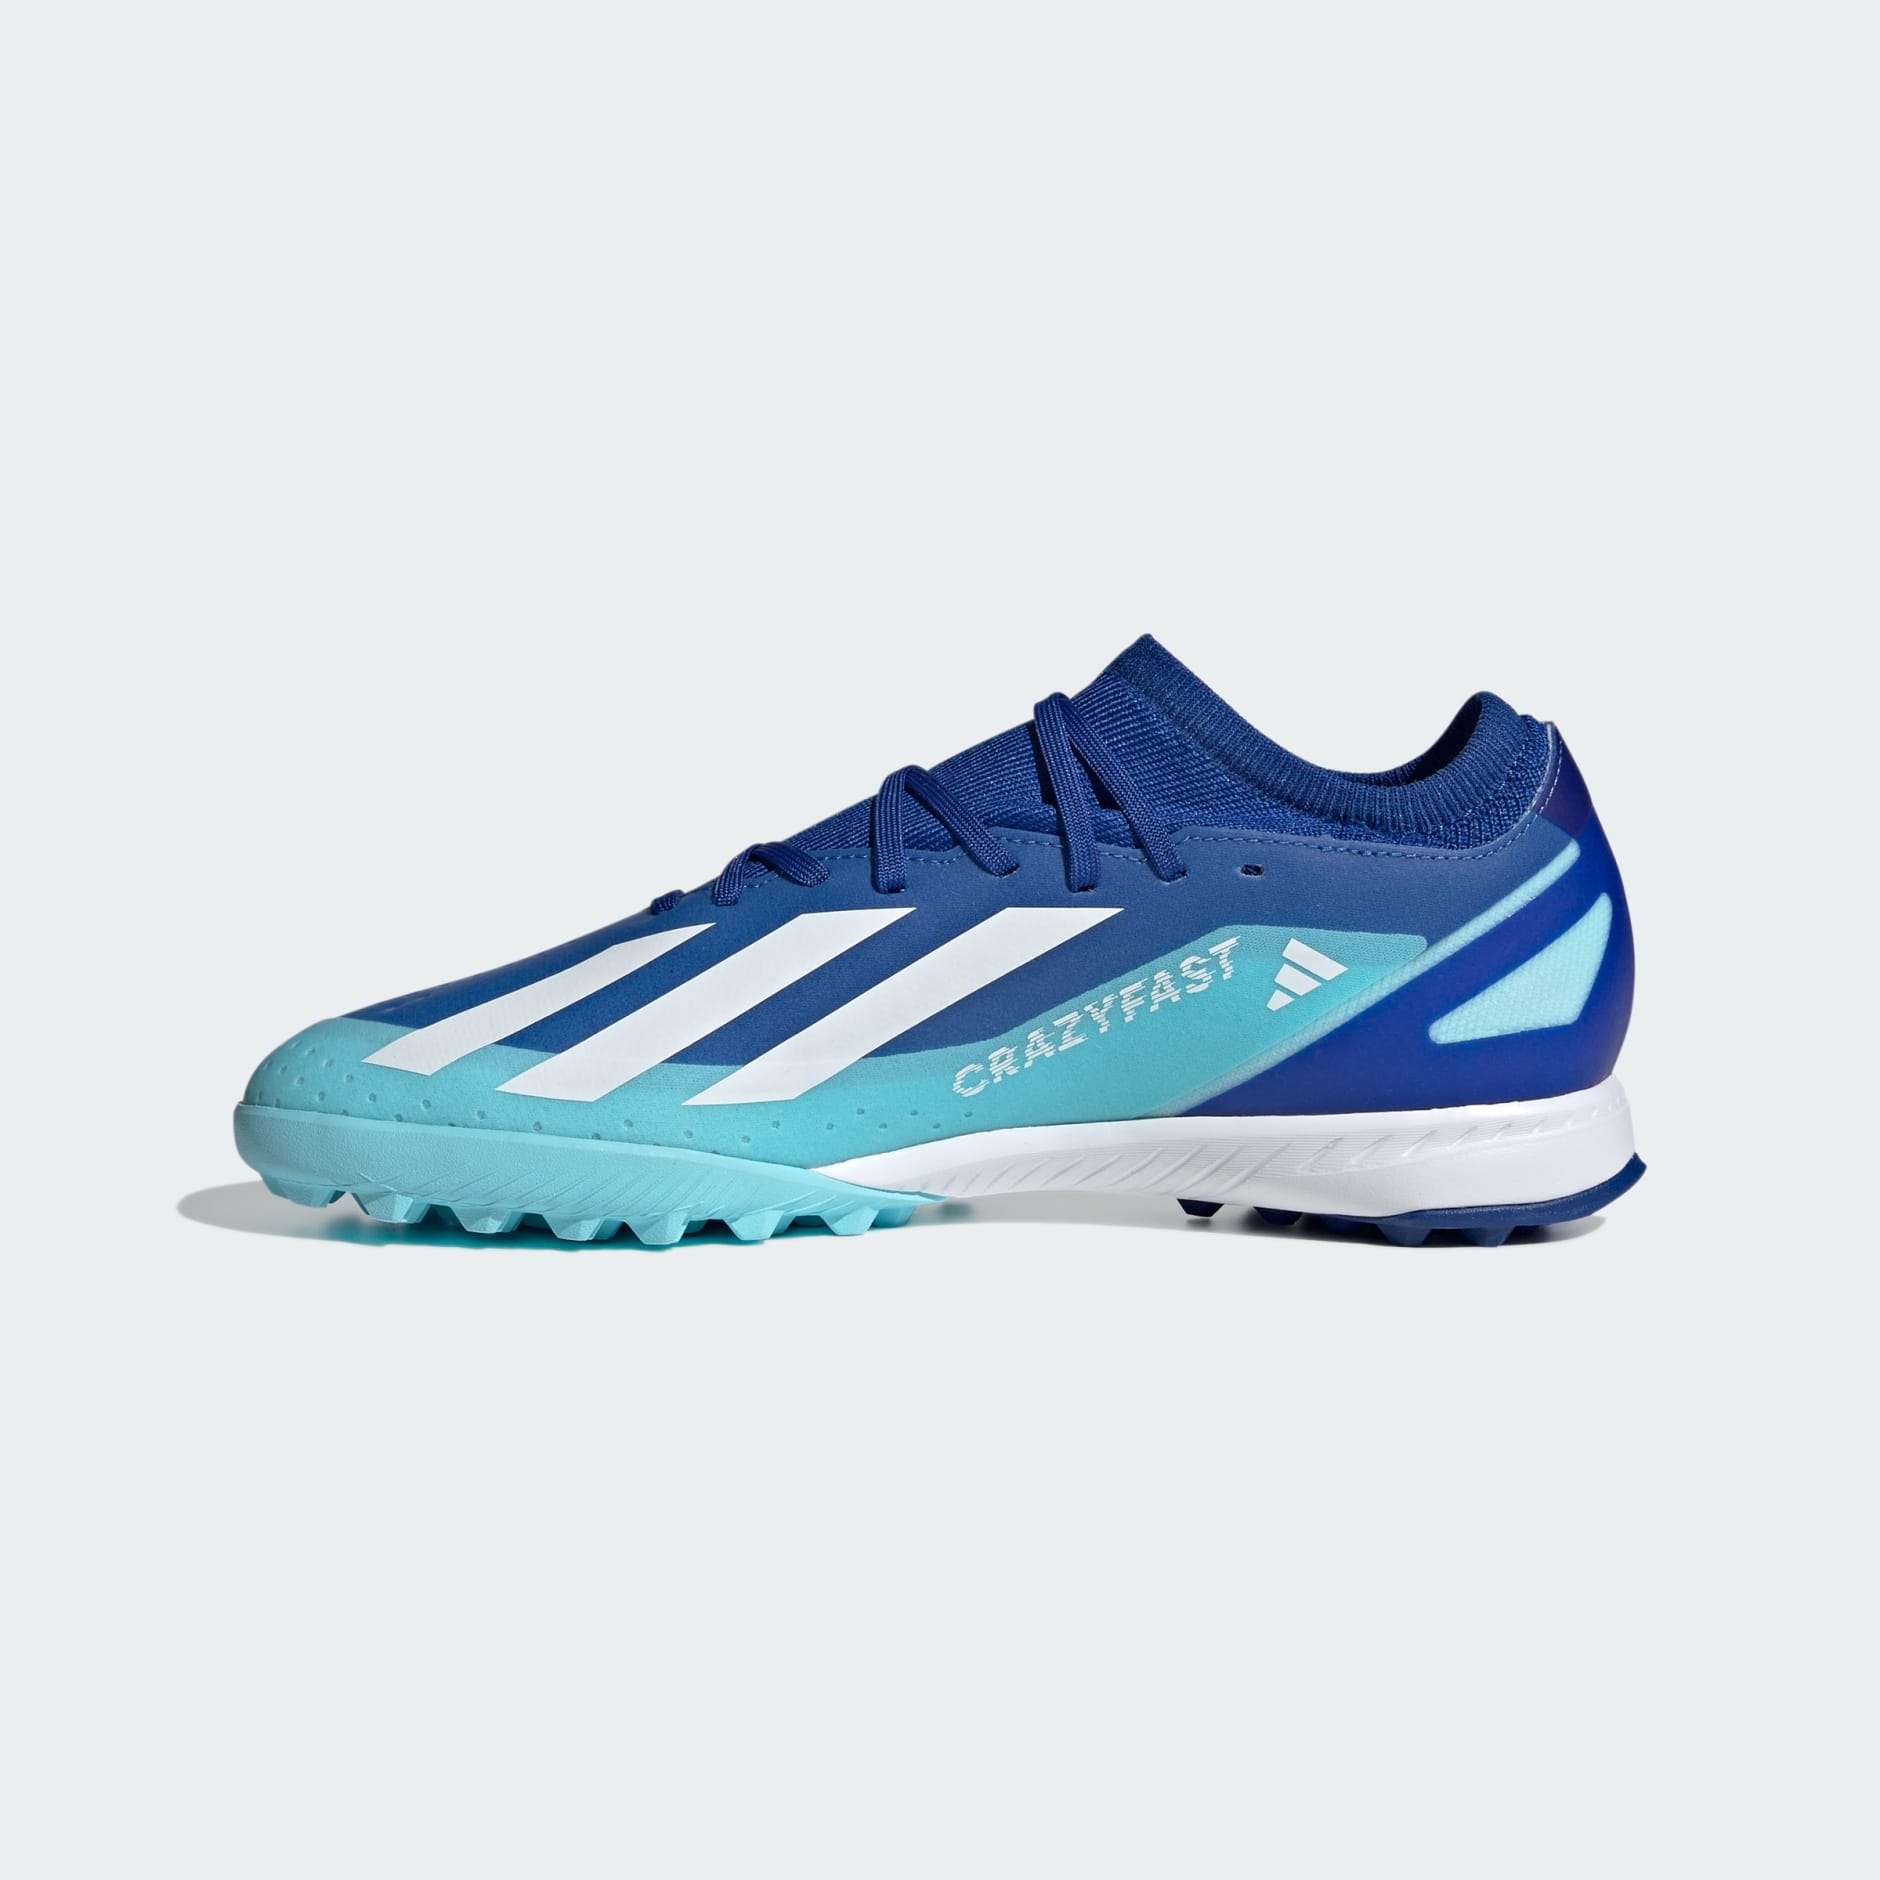 All products - X Crazyfast.3 Turf Boots - Blue | adidas South Africa